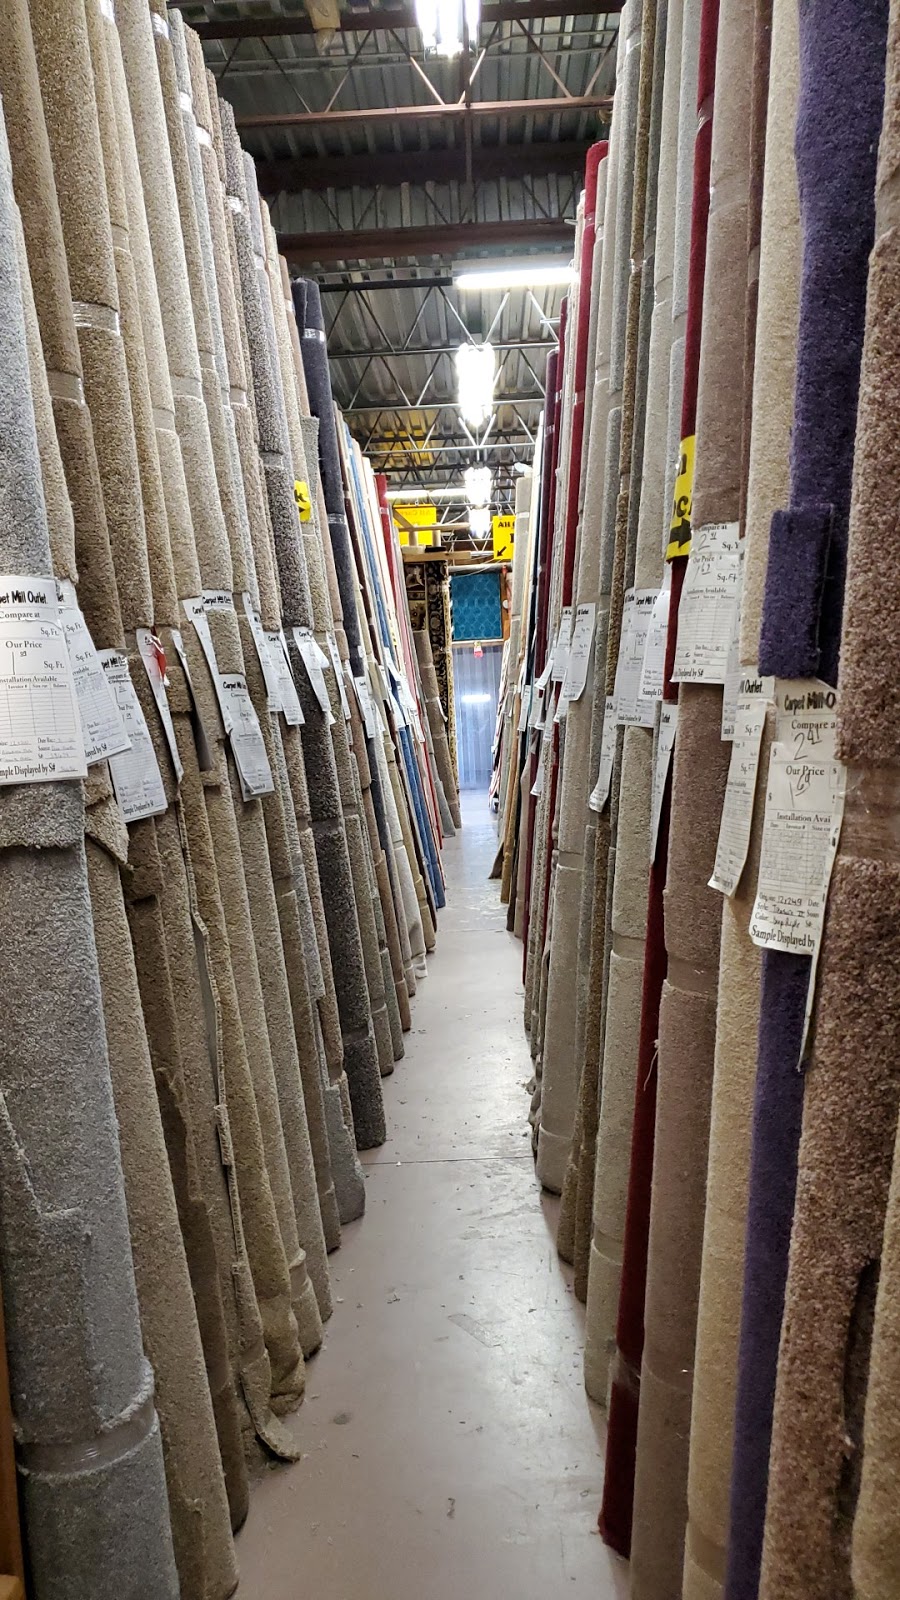 Carpet Mill Outlet | 294 Windsor Hwy, New Windsor, NY 12553 | Phone: (845) 562-0234